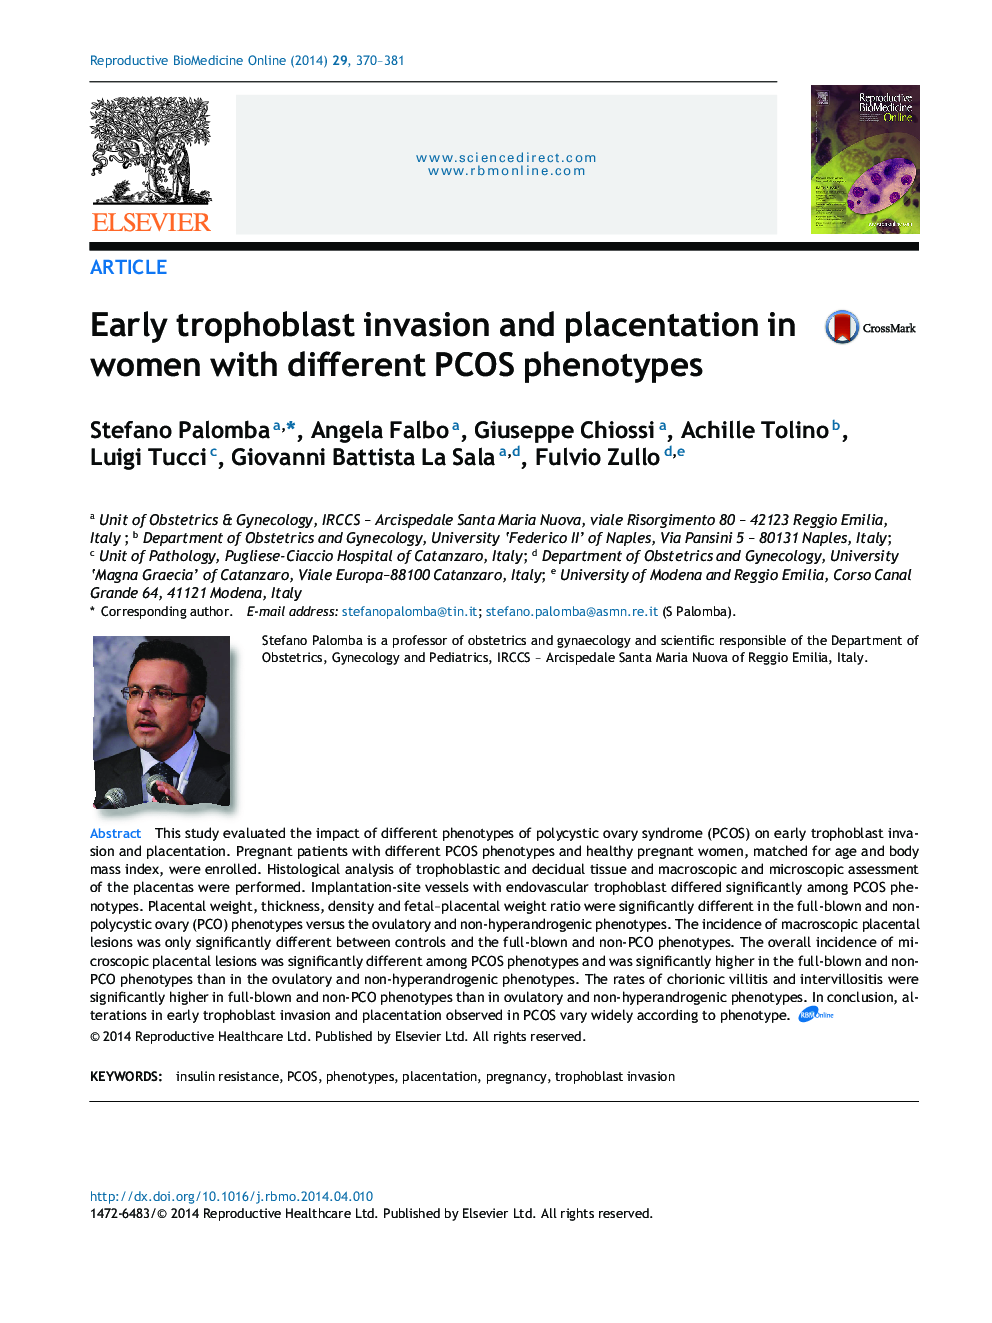 Early trophoblast invasion and placentation in women with different PCOS phenotypes